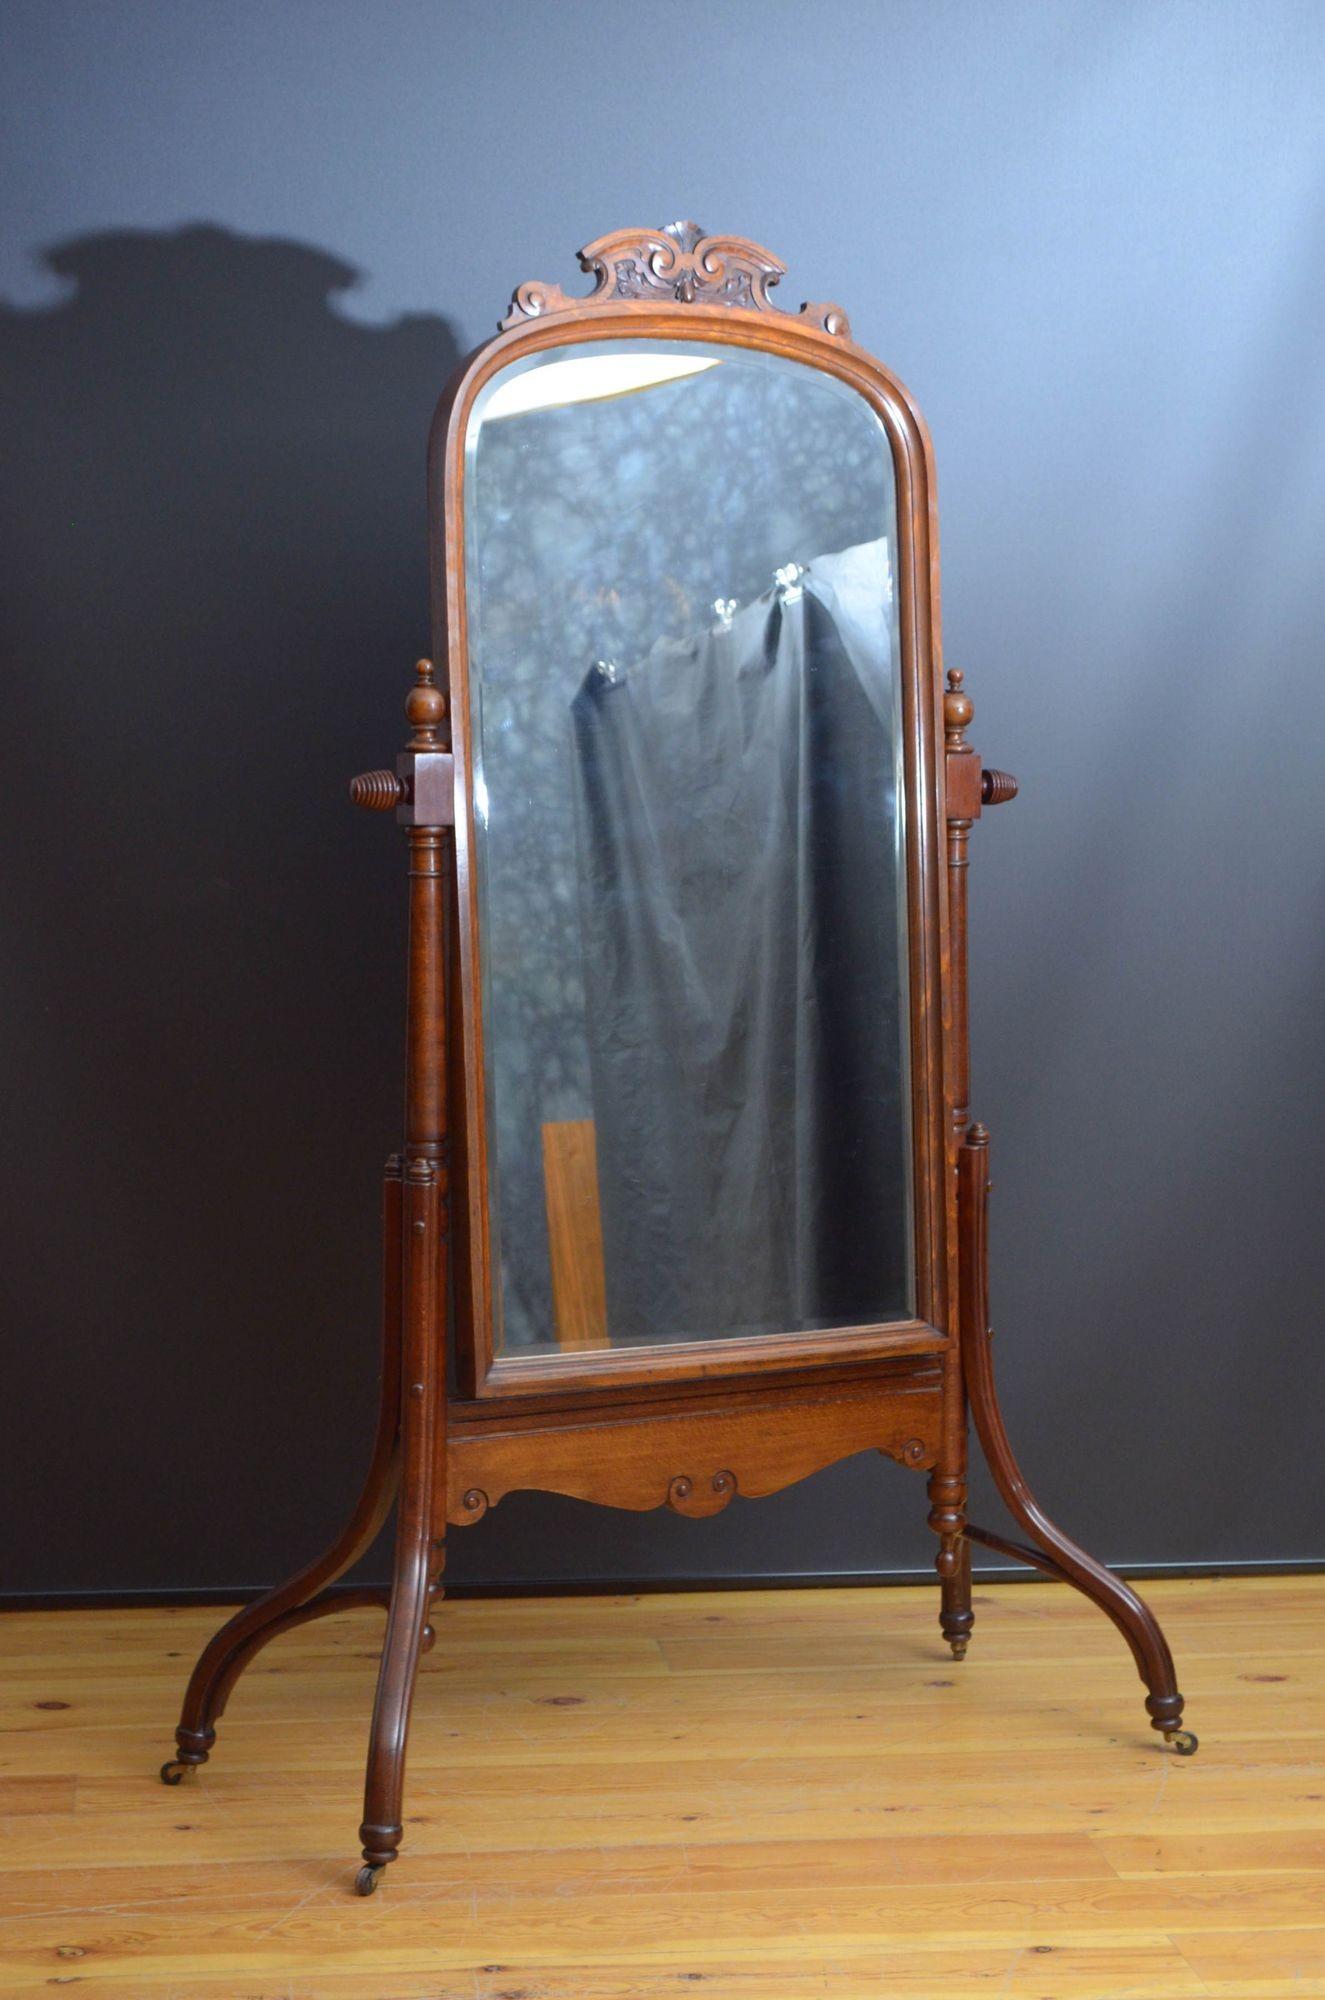 Sn5436 Stylish and very rare turn of the century Austrian bentwood cheval mirror, having original bevelled edge glass with minor imperfections in moulded frame with decorative crest to the top, enclosed in bentwood frame with decorative beehive